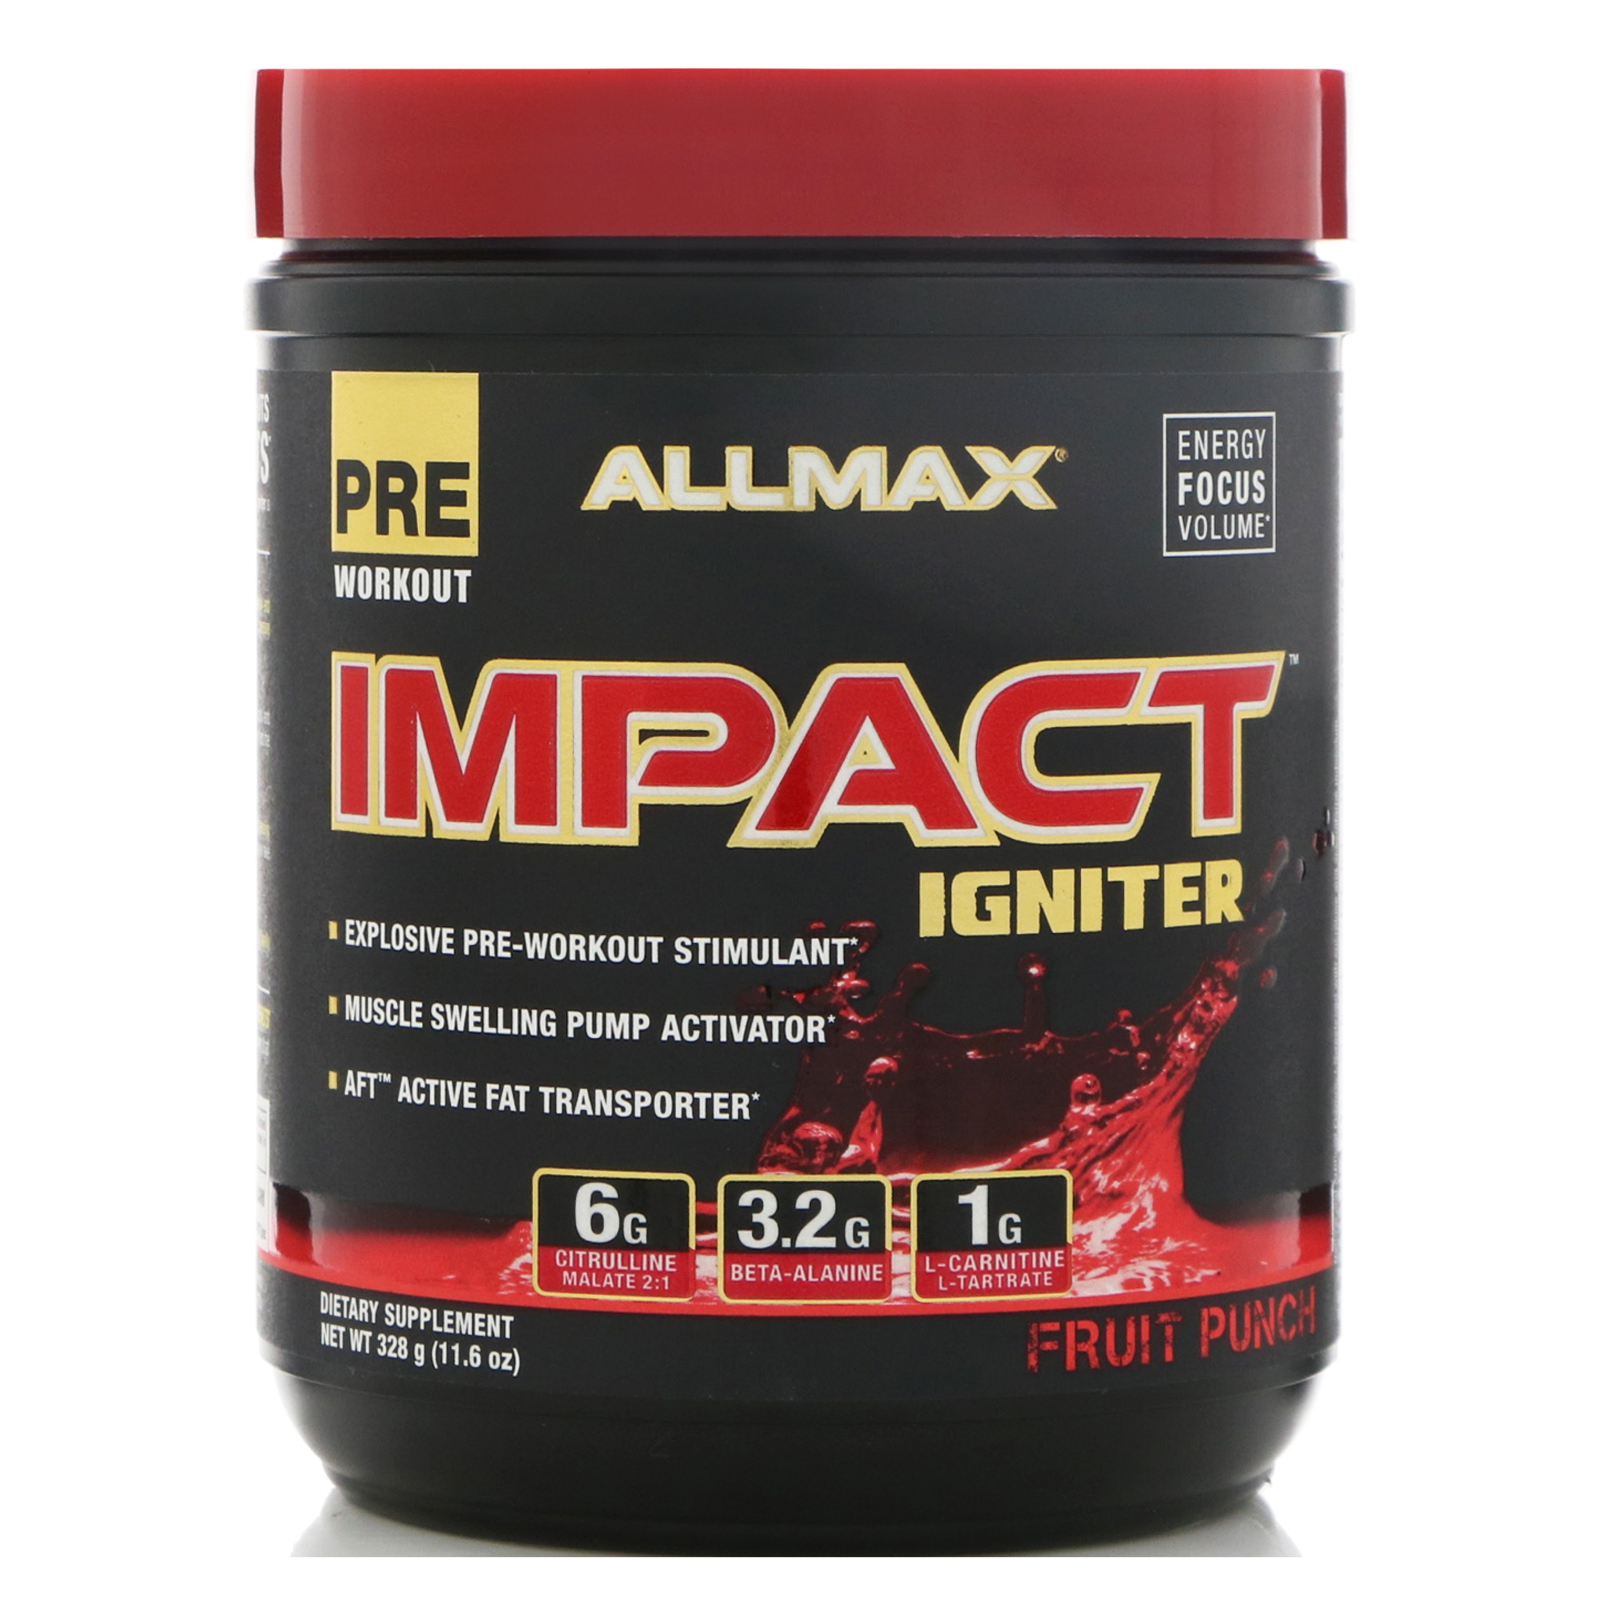 15 Minute Allmax Pre Workout for Weight Loss